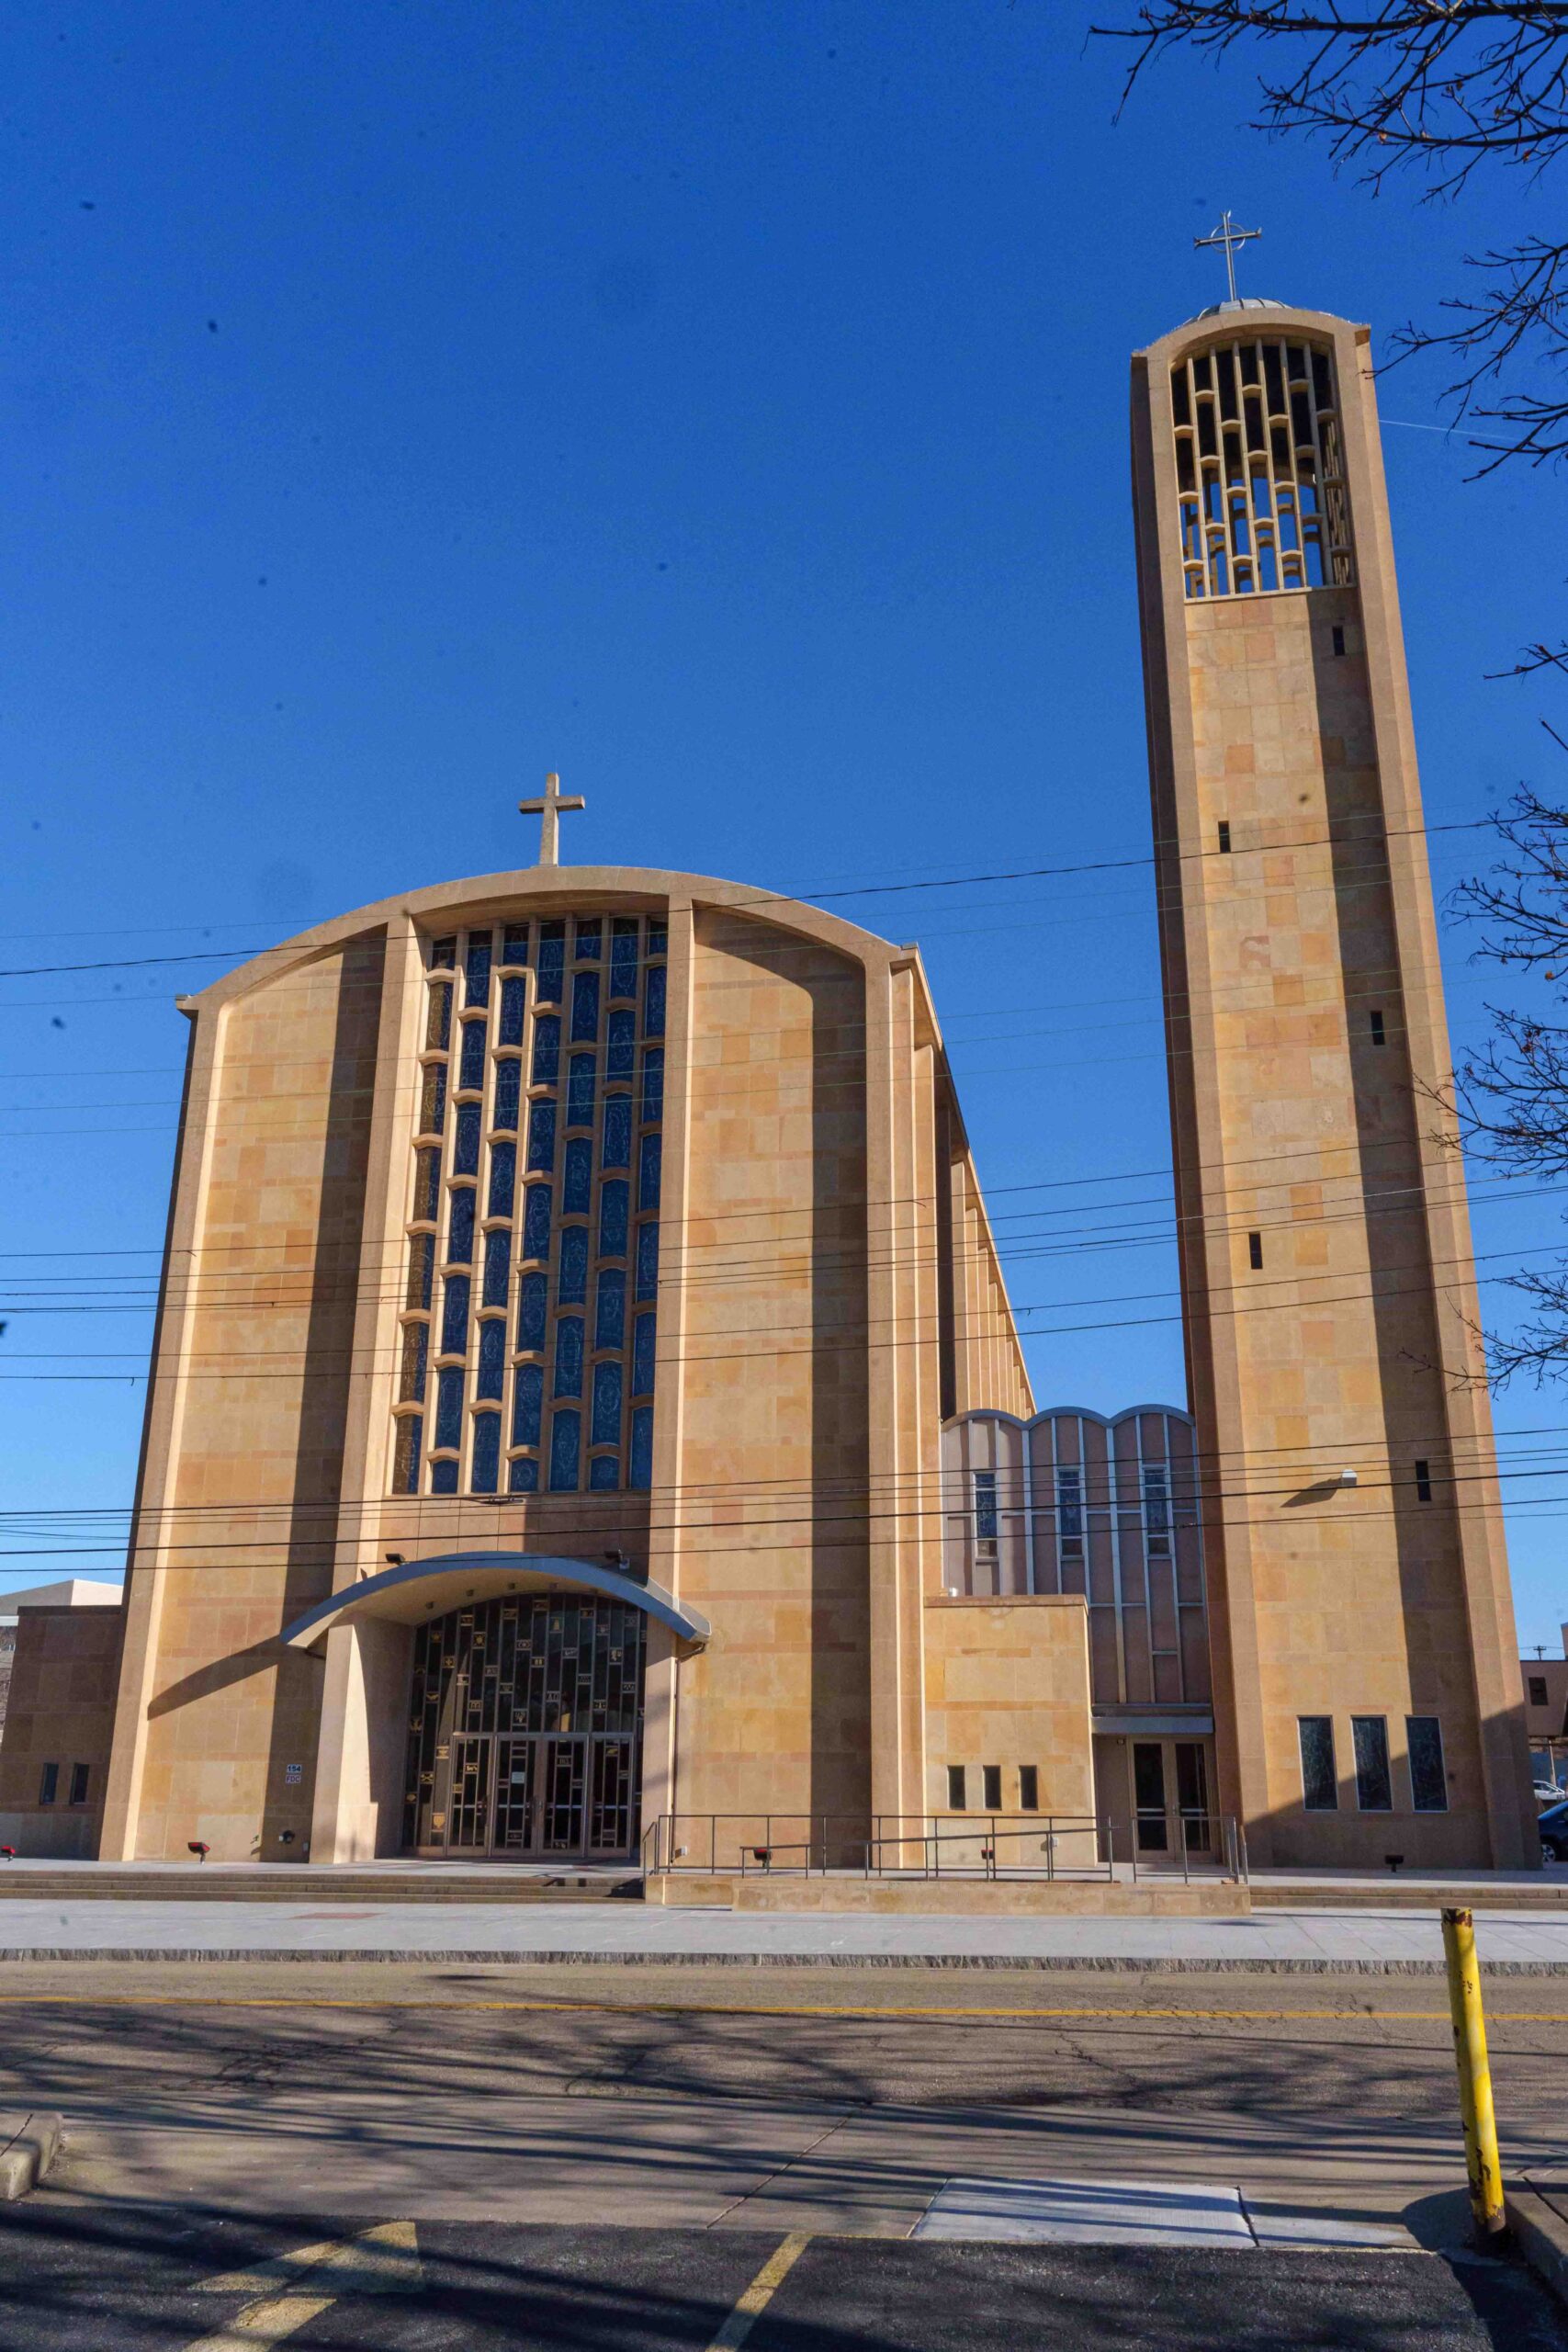 A shot of St. Columba Cathedral from the street. Photo by Jimmy Joe Savage